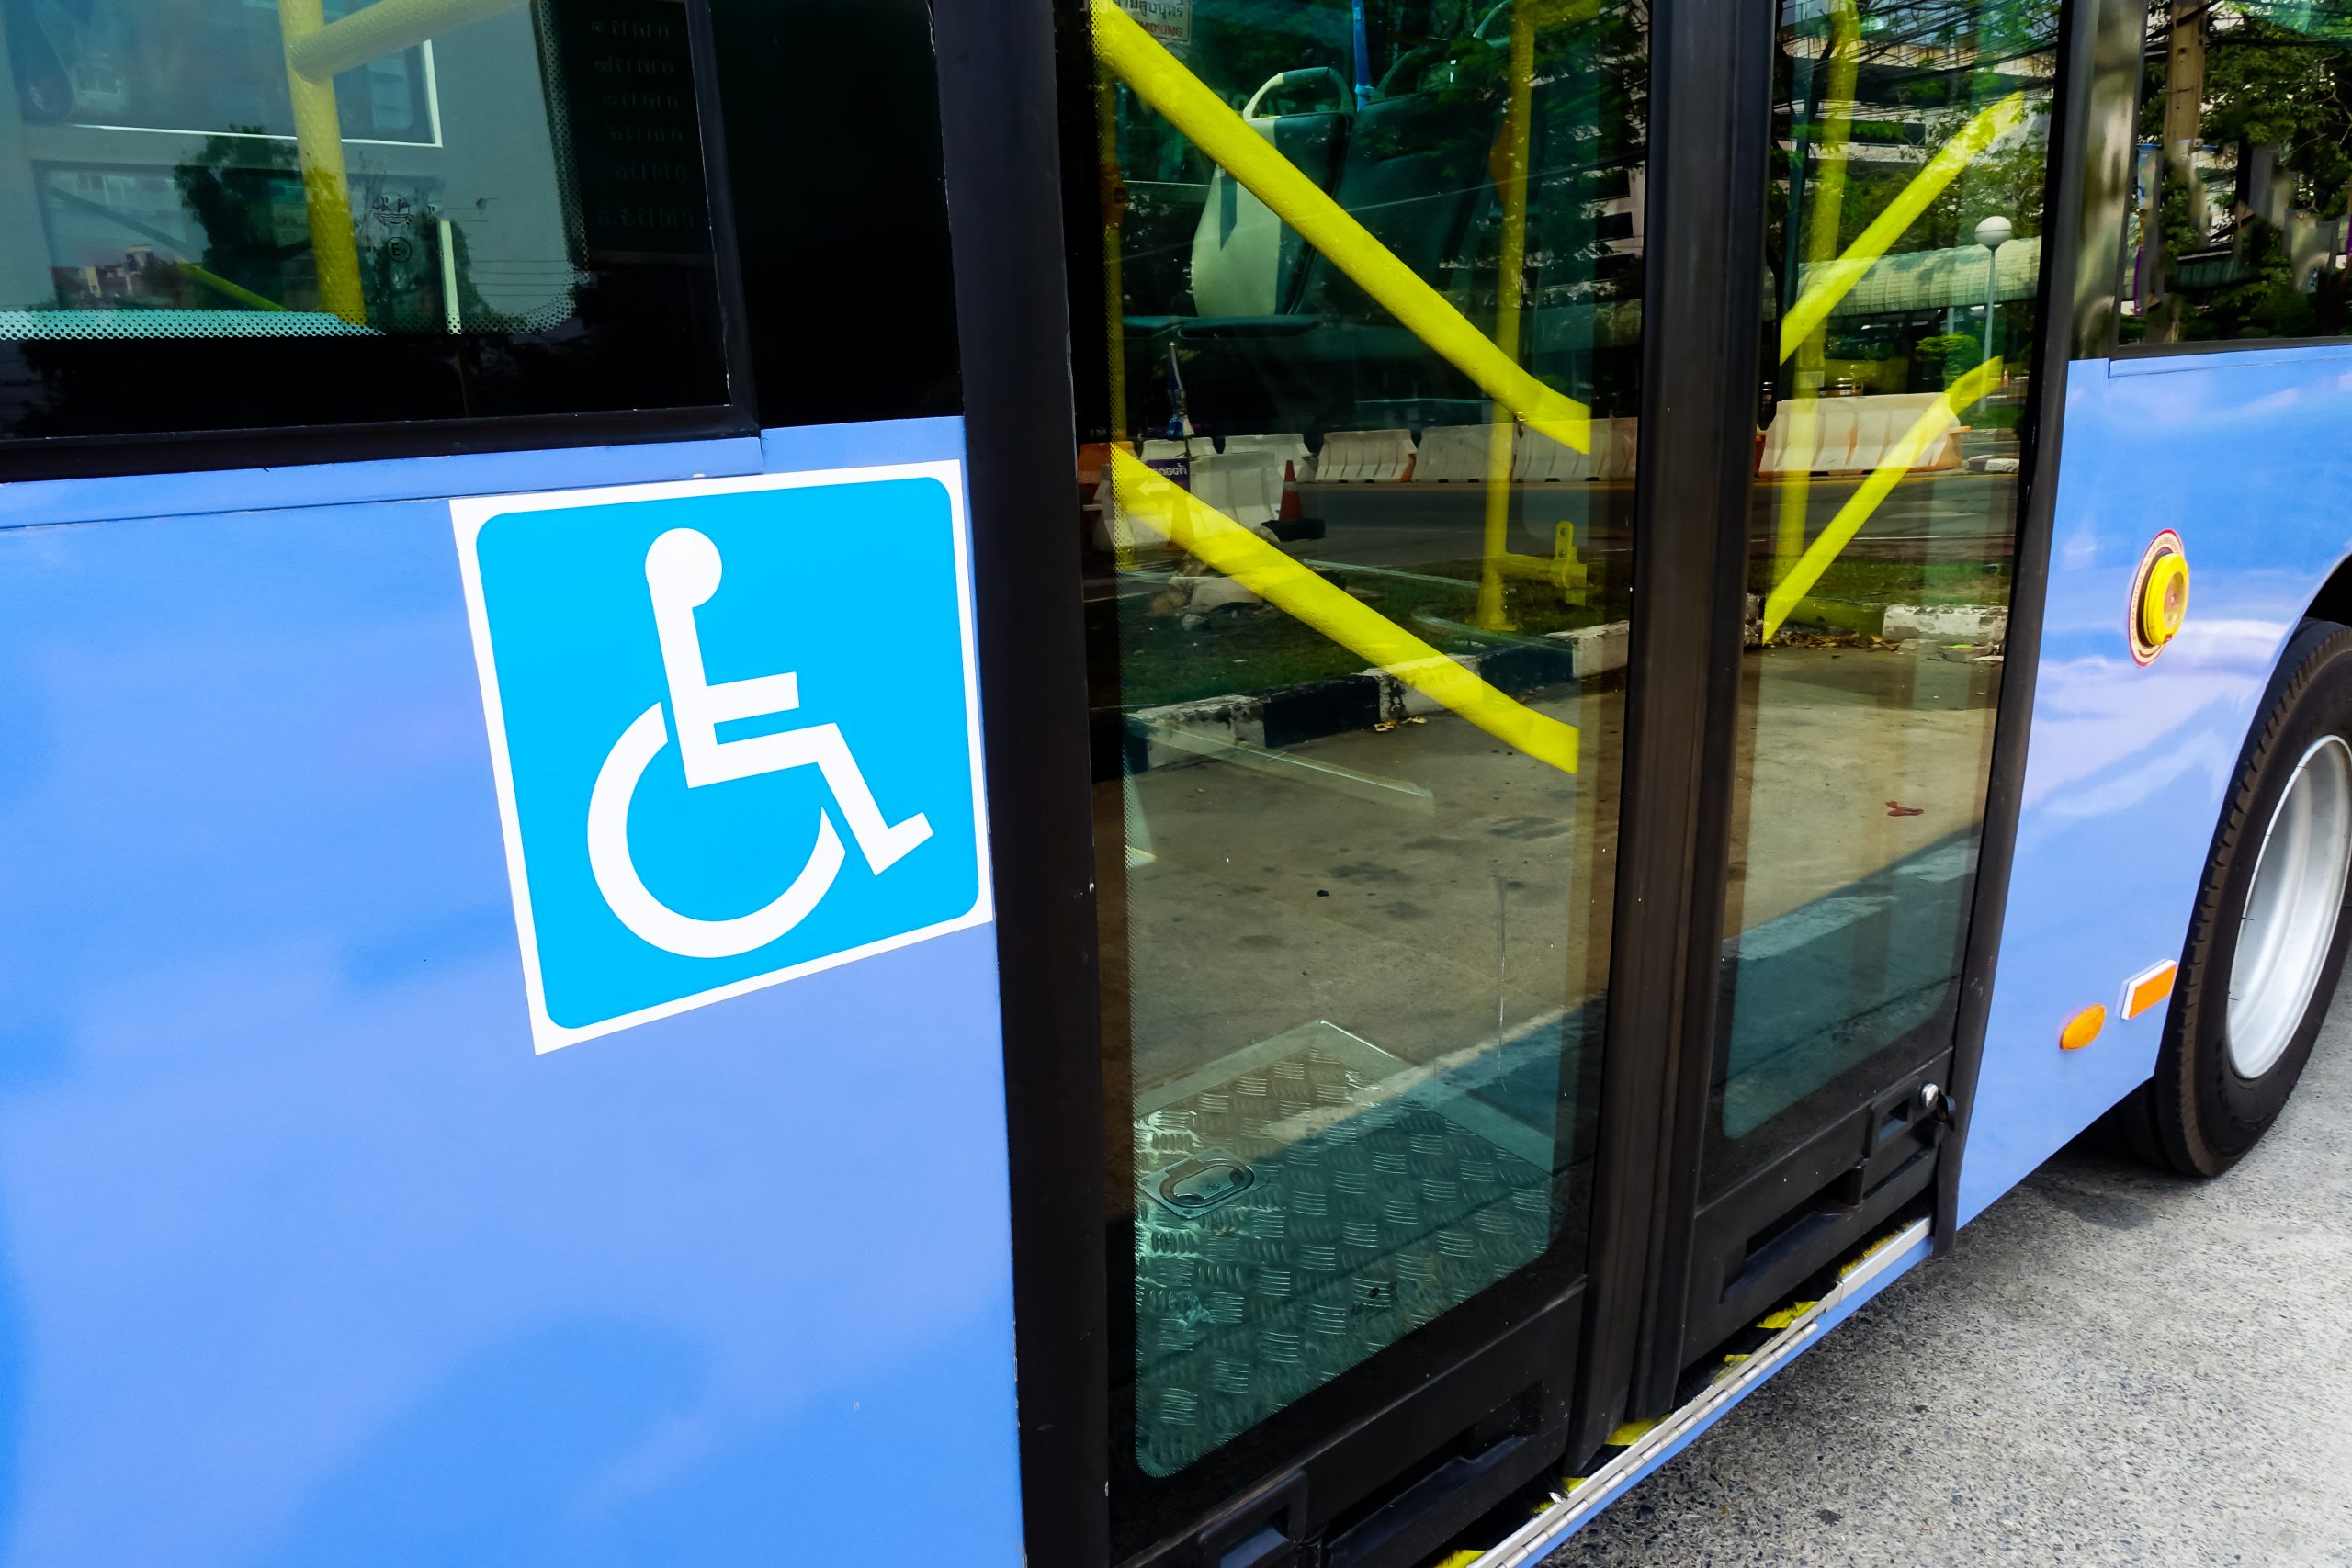 Accessibility across all transport modes